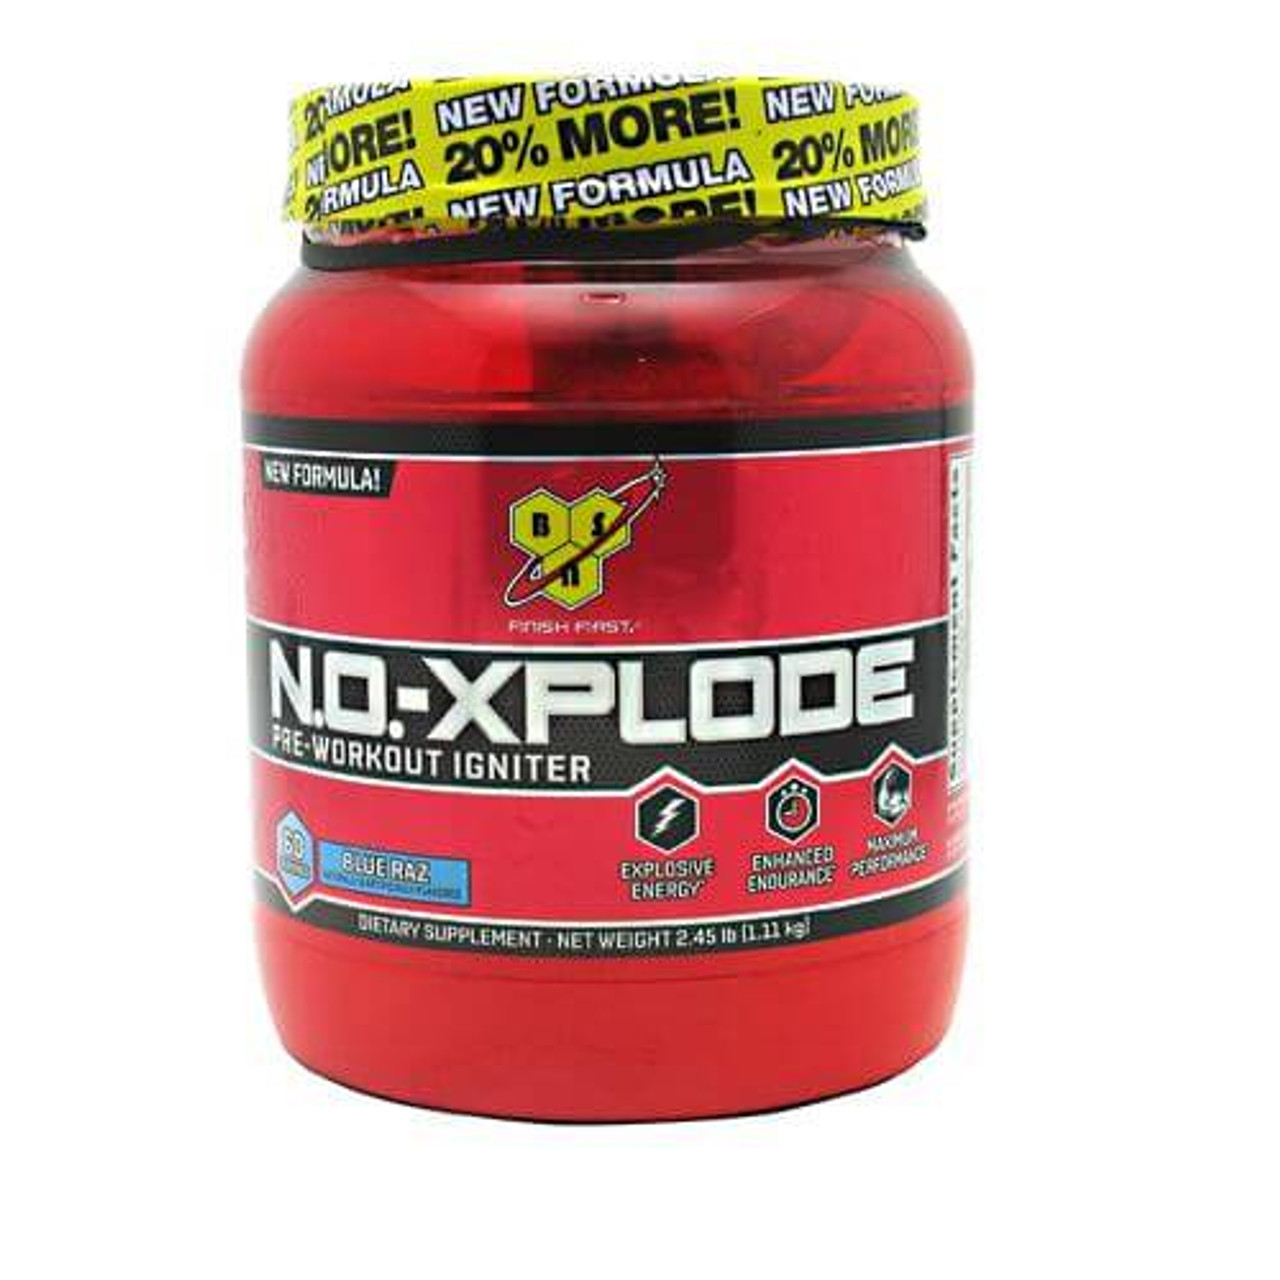 30 Minute Best Pre Workout No Xplode for Weight Loss